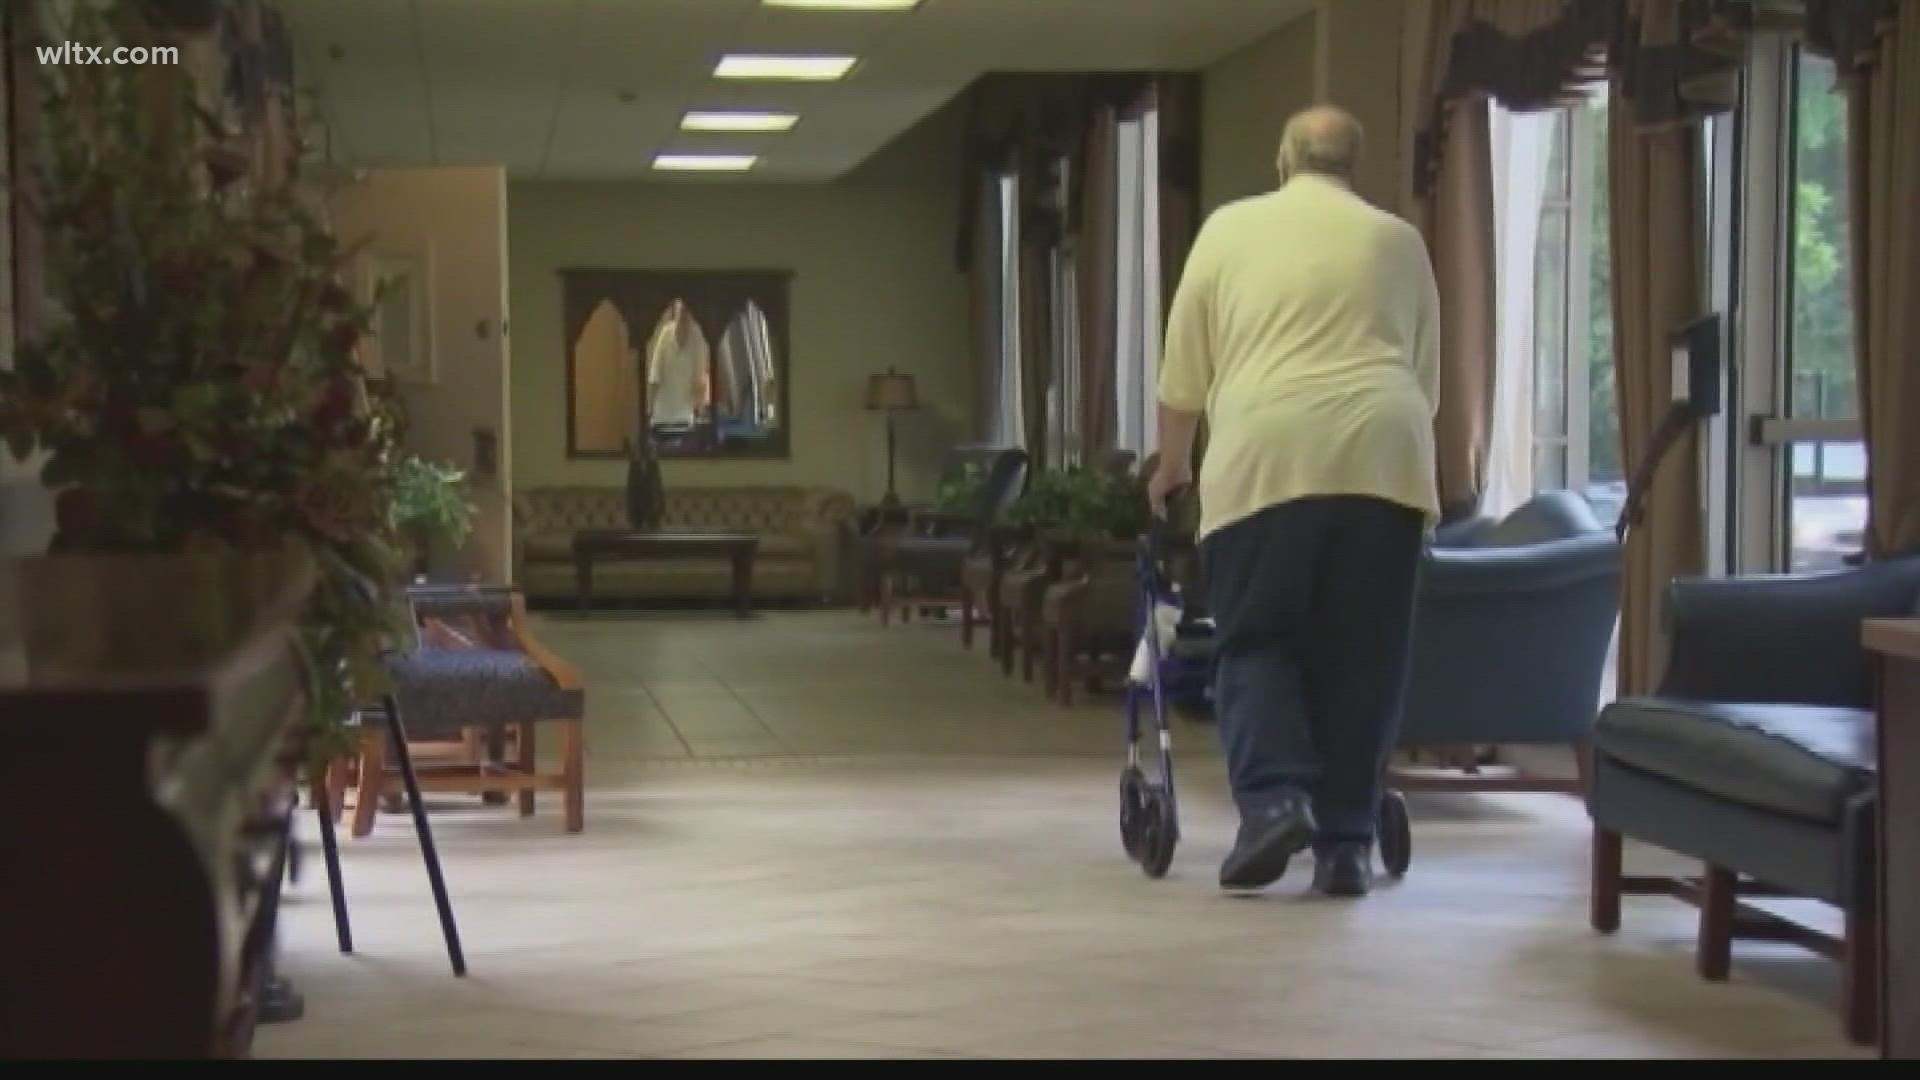 Nursing home deaths in South Carolina are on the rise as COVID-19 cases continue to increase in the state.